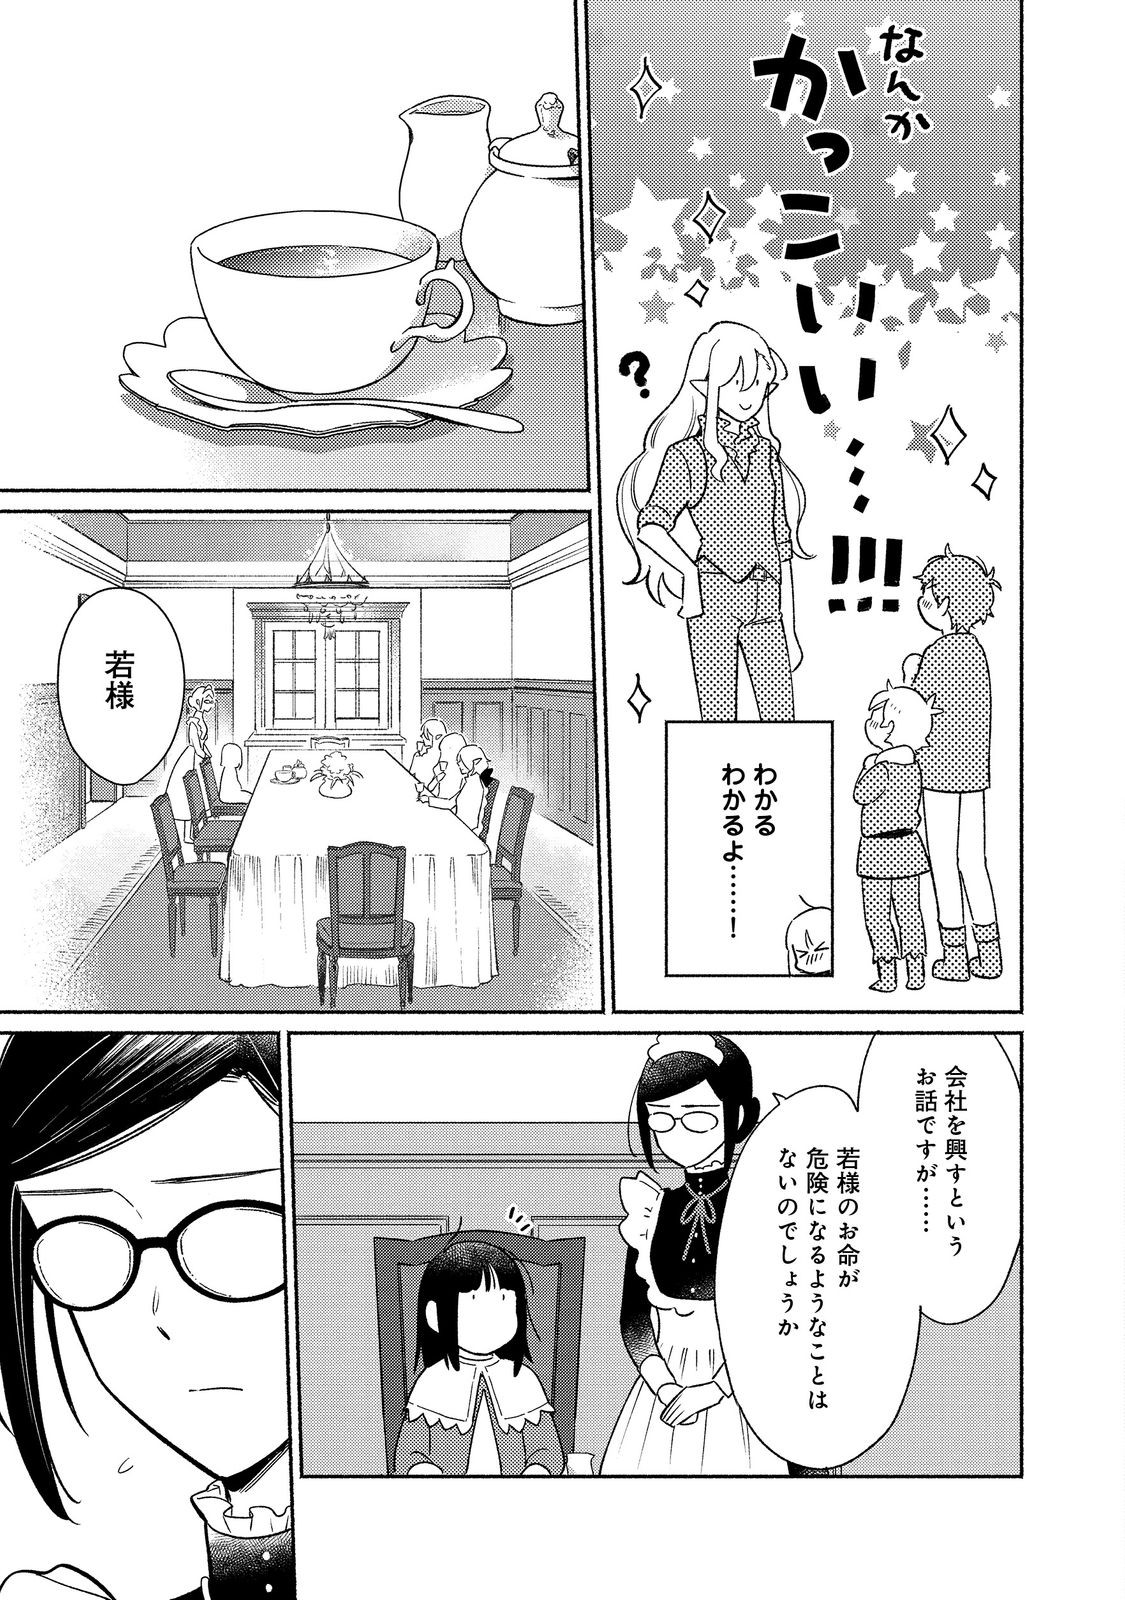 I’m the White Pig Nobleman 第20.1話 - Page 13